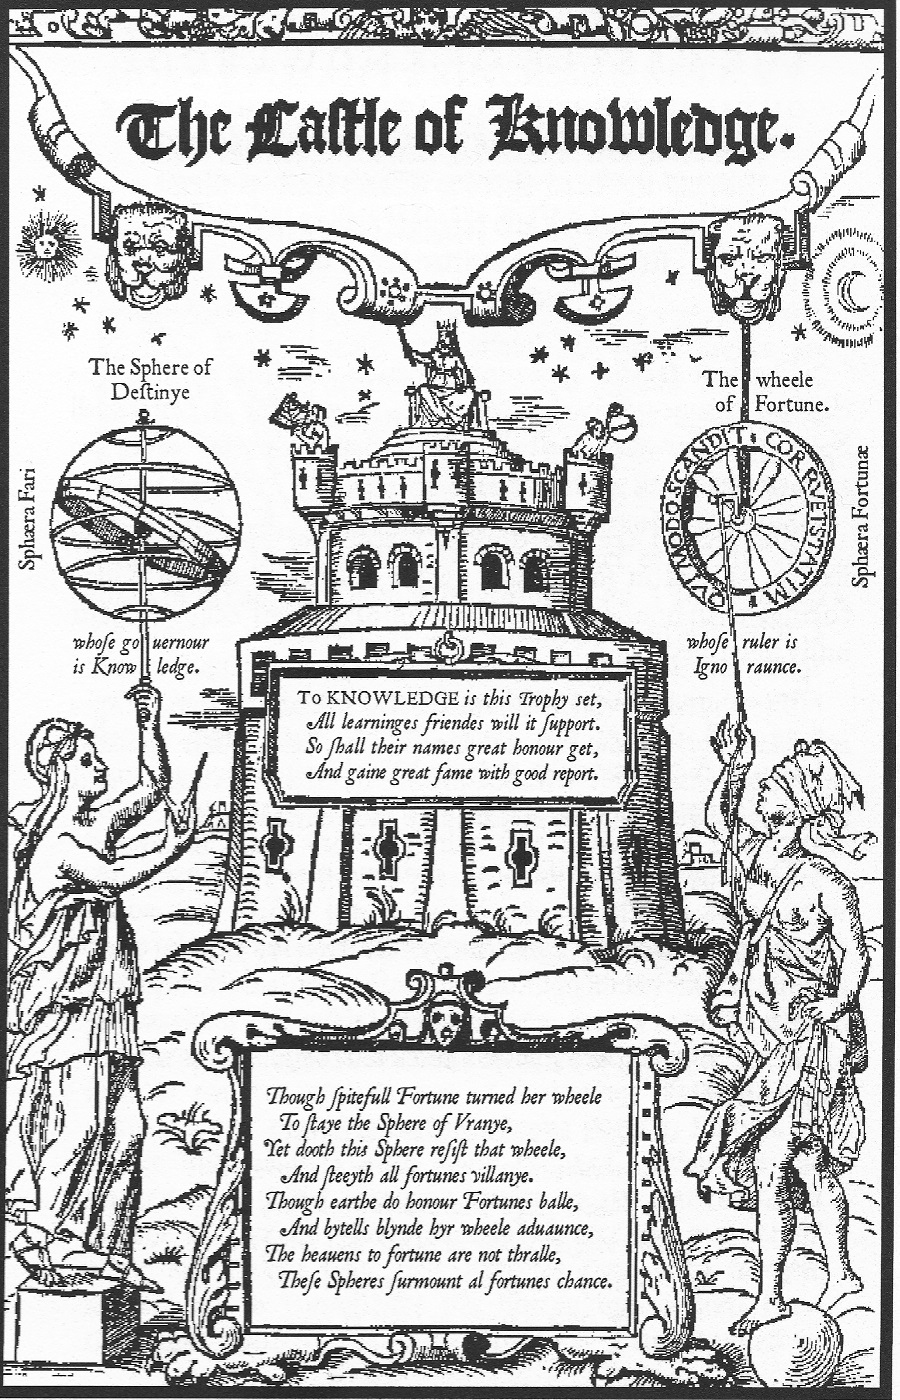 Frontispiece of Robert Recorde: "The Castle of Knowledge" (1556)